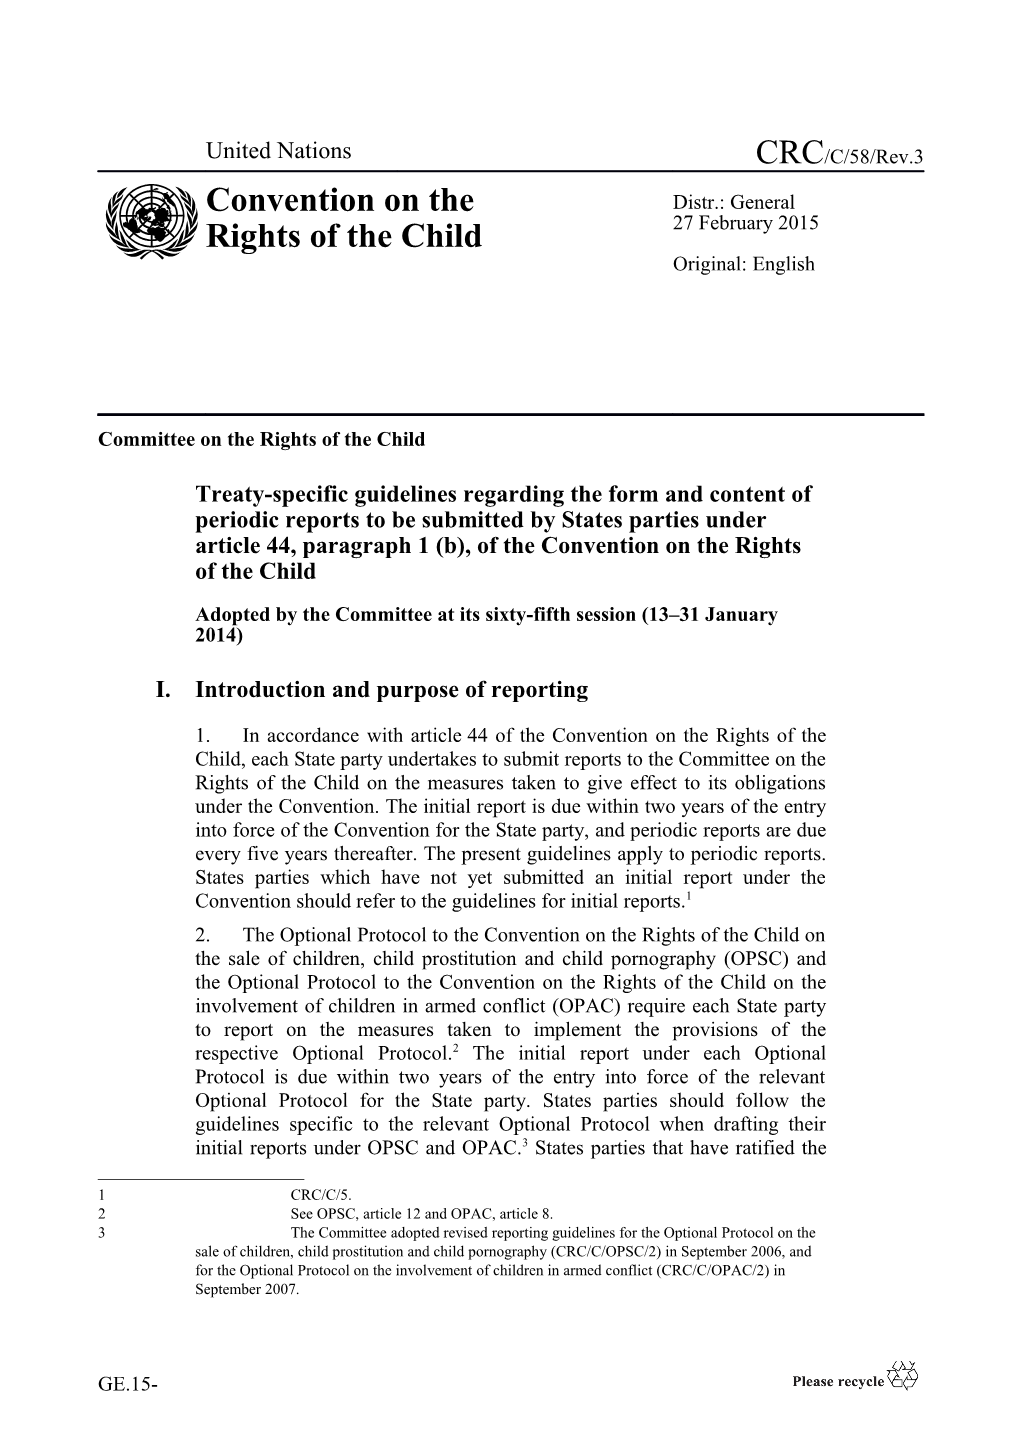 Committee on the Rights of the Child s27